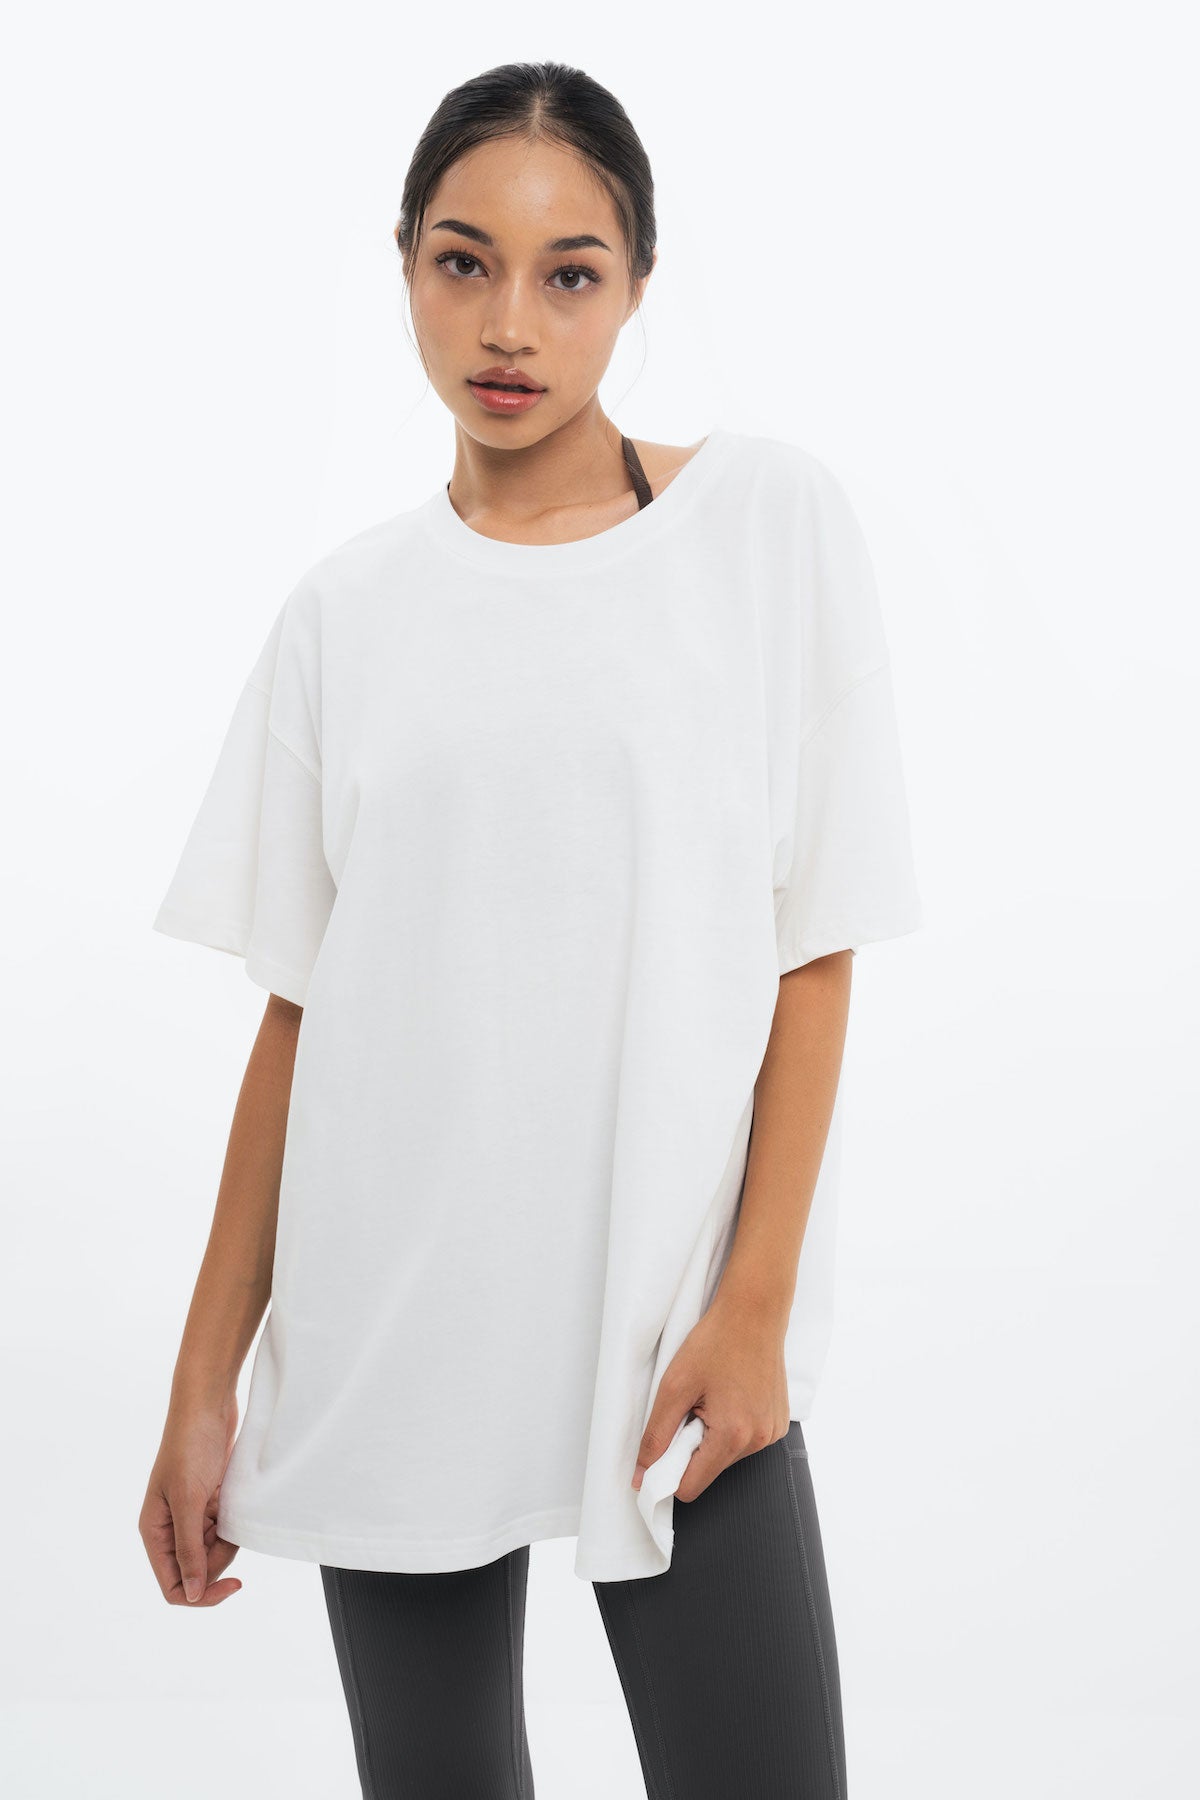 Flap T-Shirt in White (LAST PIECE)